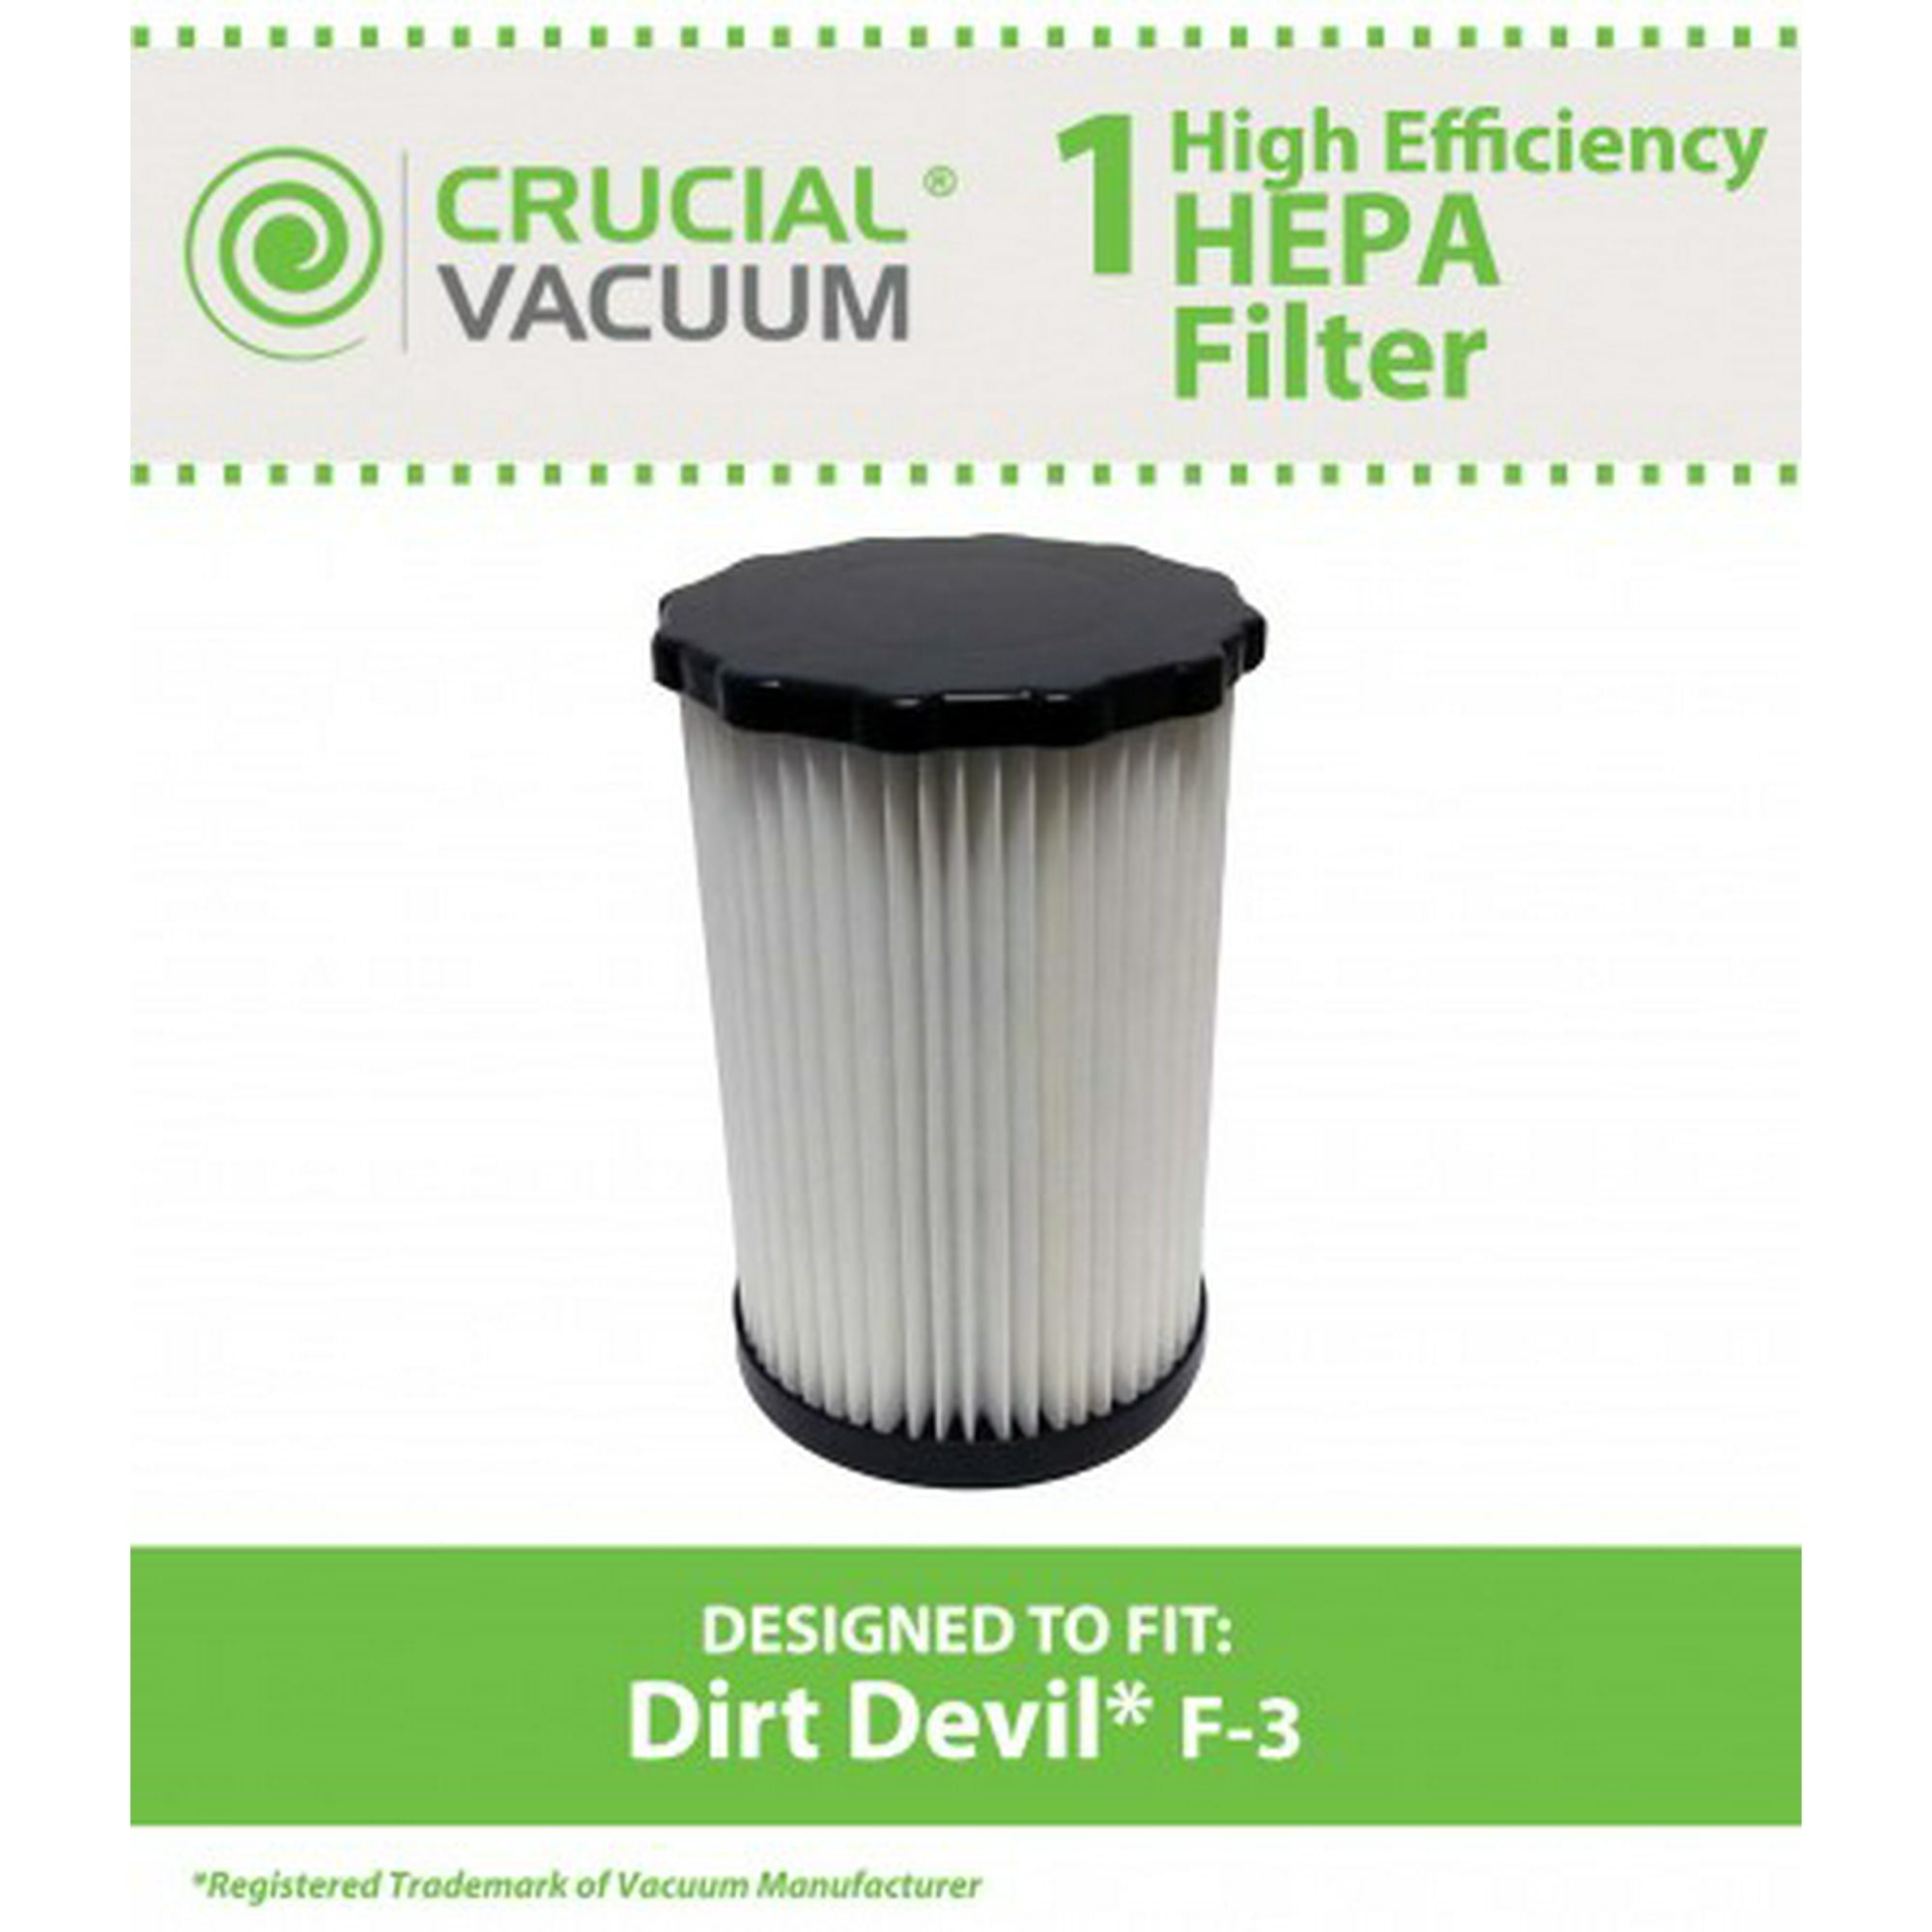 Bulk,1 pk,2 pk,4 pk 1-Pack M082500 M082505 M082555 M082581 SD40005 Think Crucial Replacement Air Filters 7.2-Inches Tall HEPA Style Part Dirt Devil F-3 Vacuum Cleaner Filter Pair with Parts #3250435001 Model Washable and Reusable 